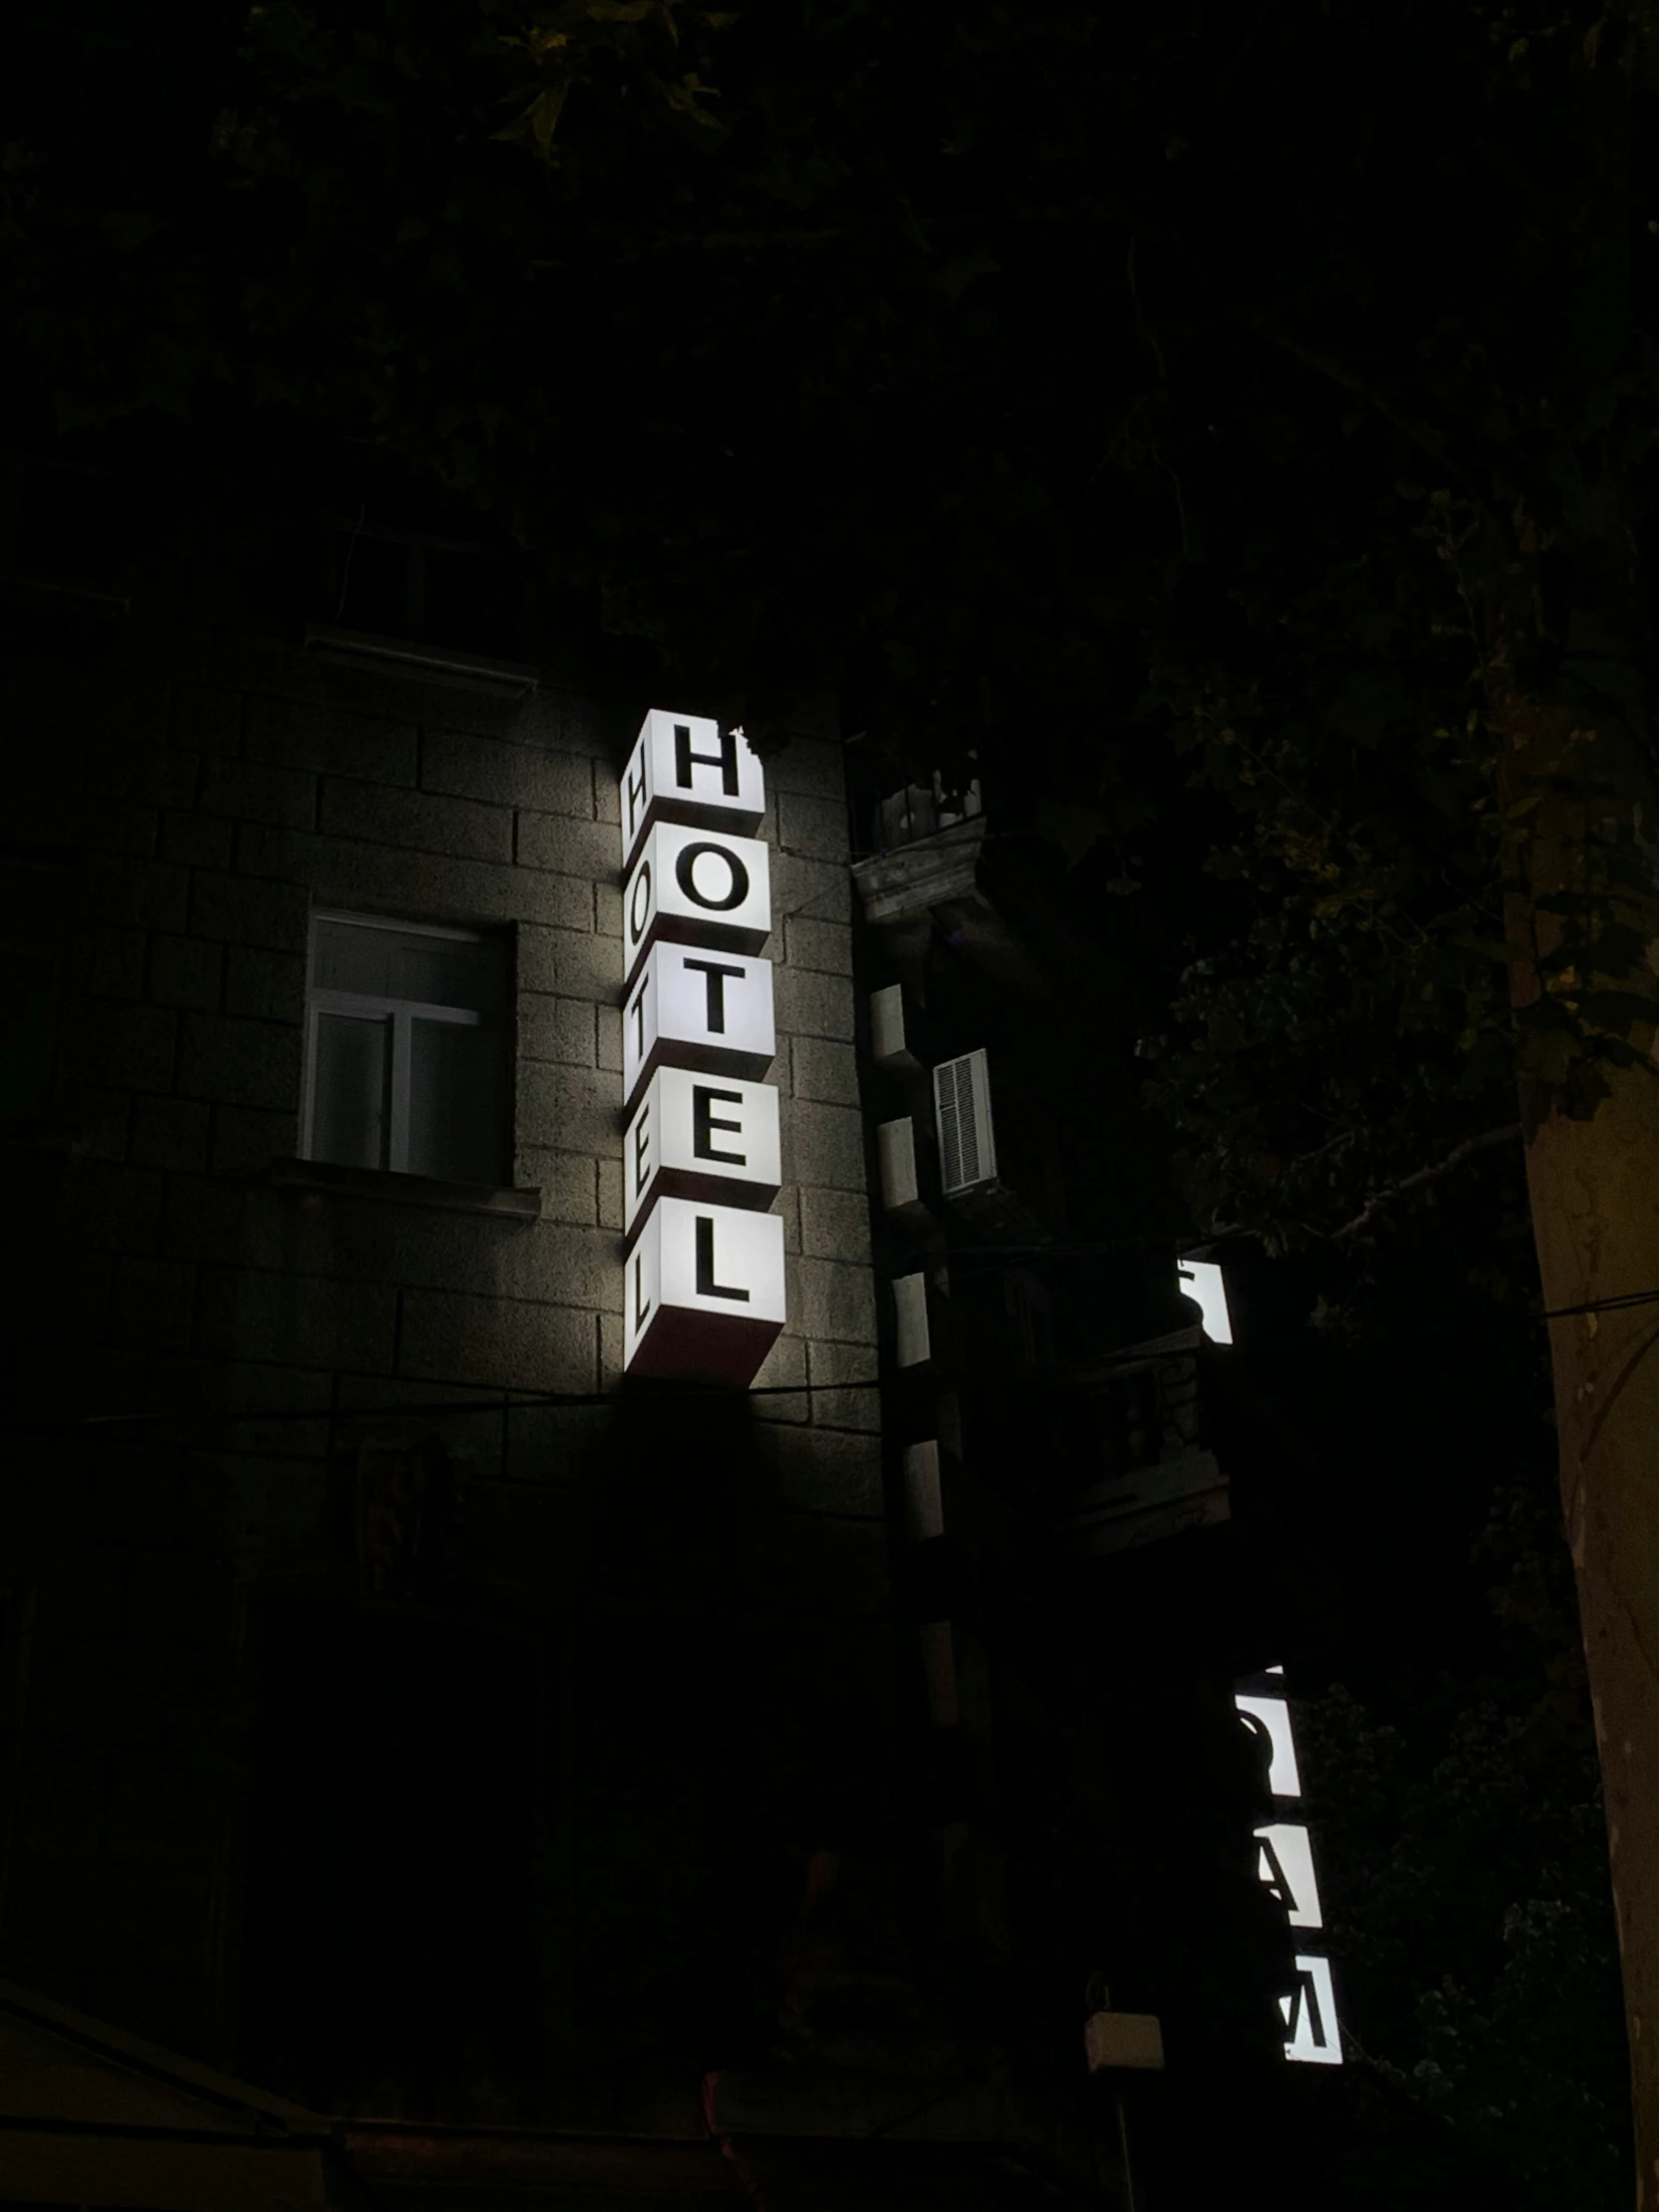 a sign and lights on a building by night